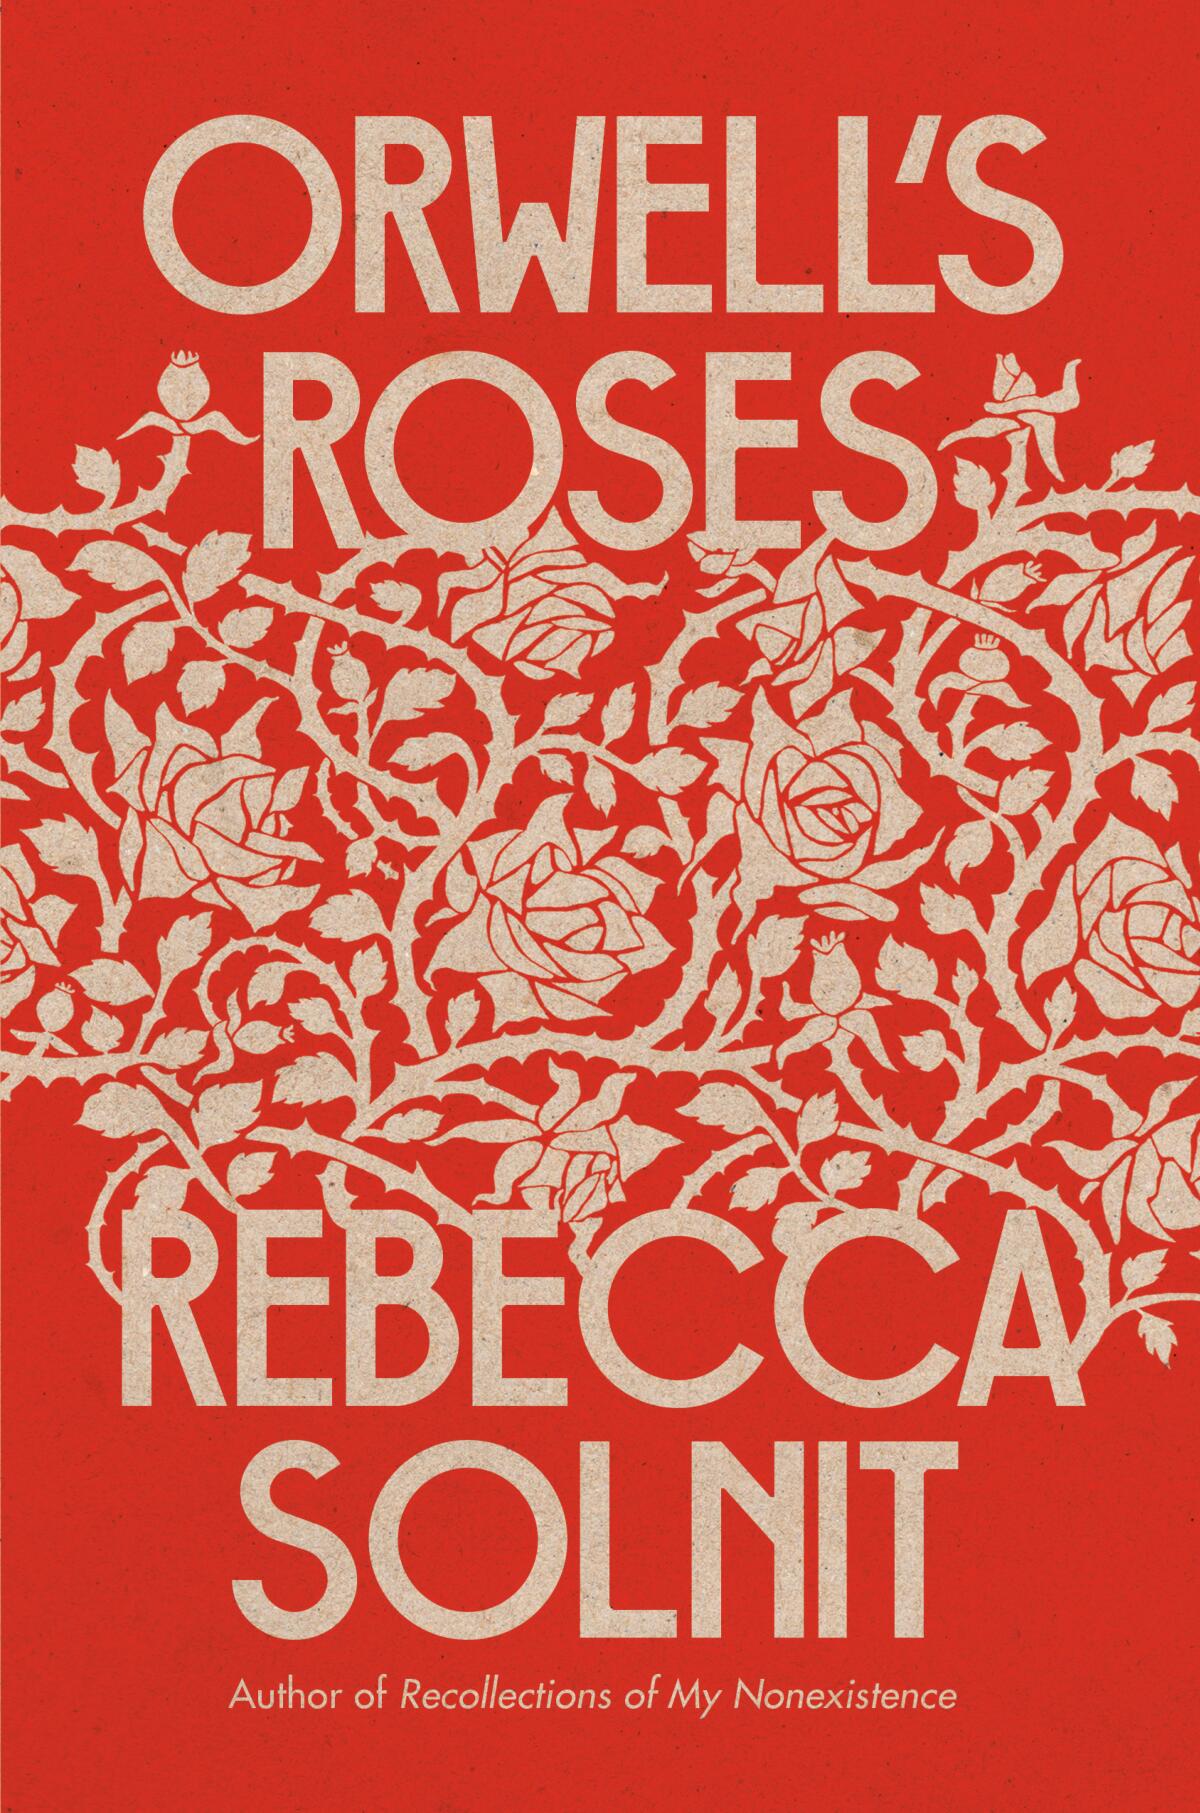 "Orwell's Roses," by Rebecca Solnit